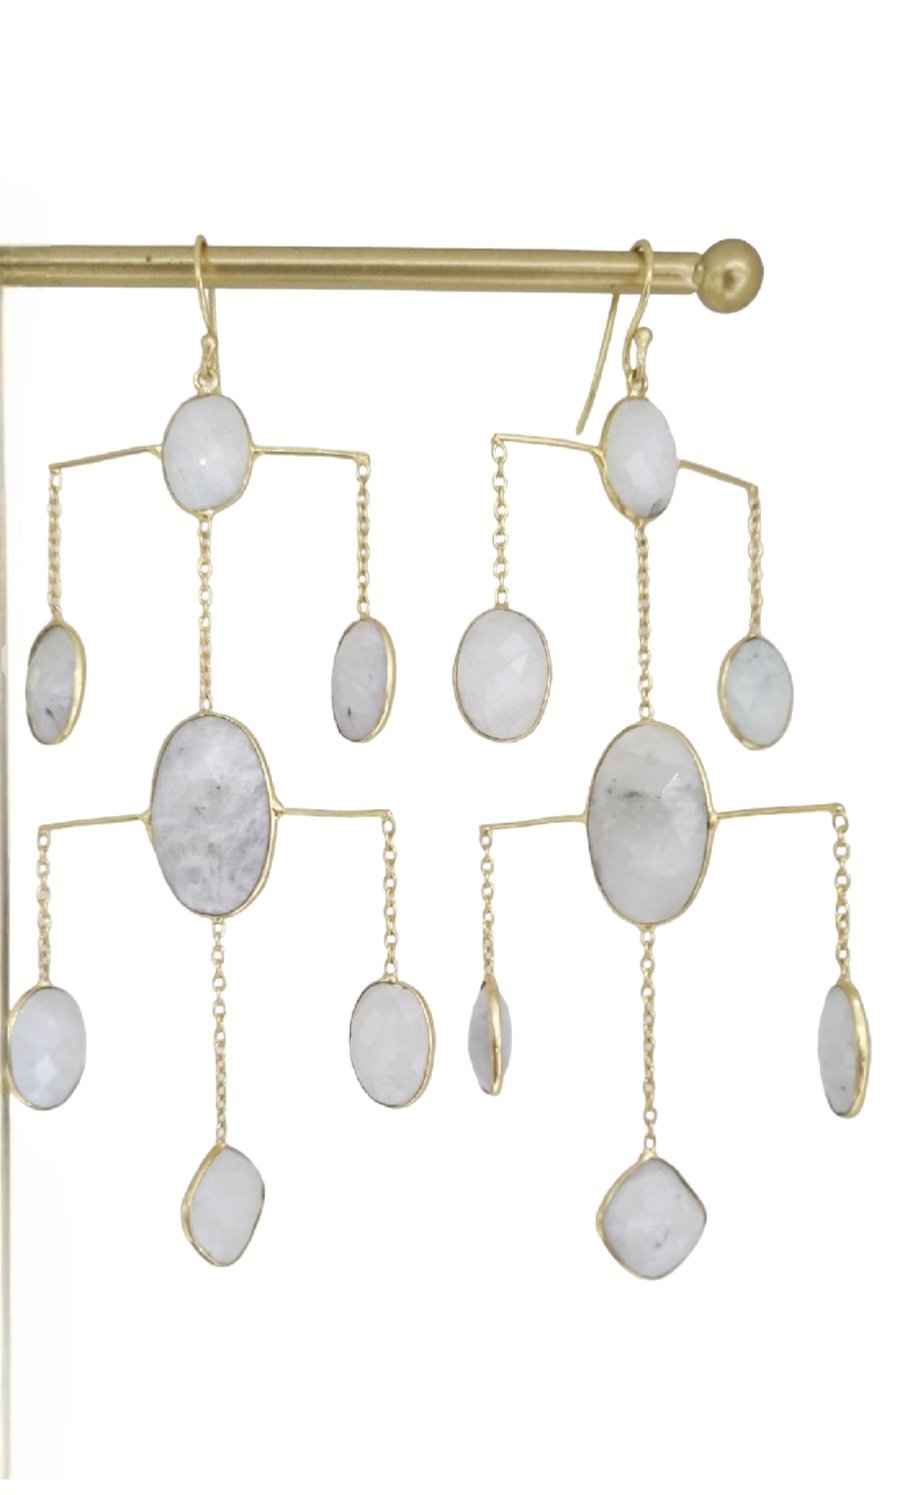 Earrings made with moonstone and brass. Length 12cm Weight 12.1 g